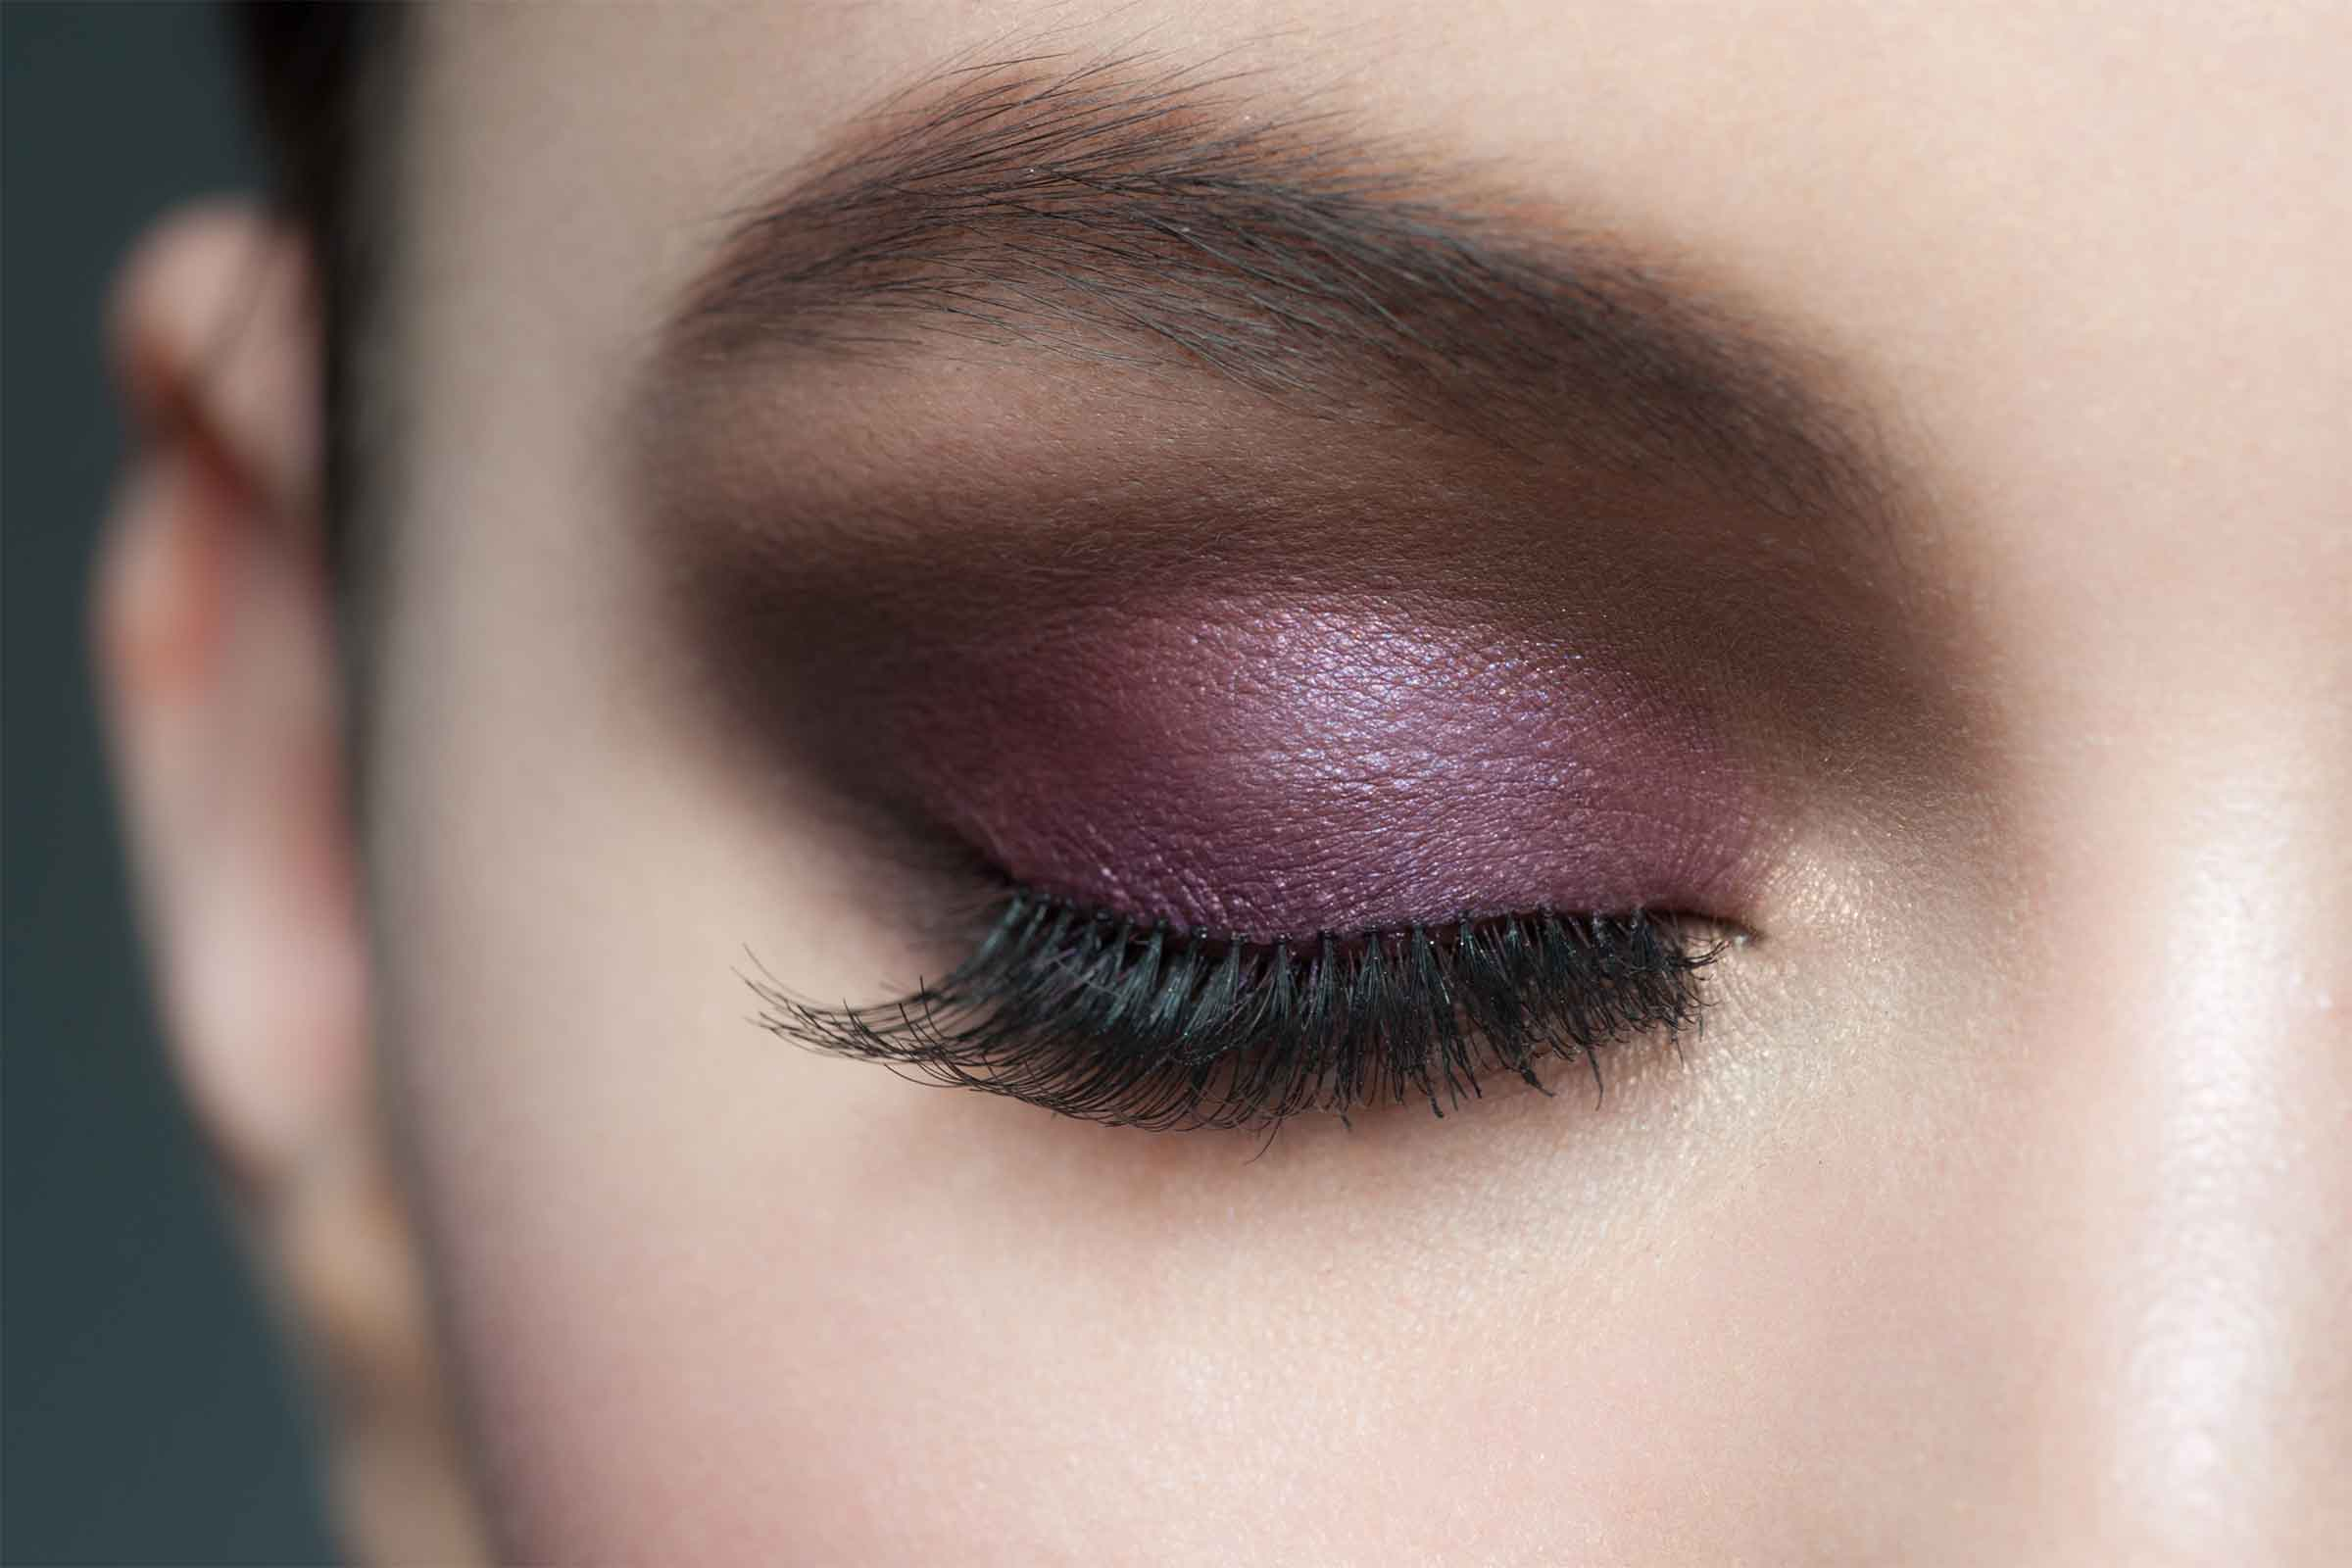 Pictures Of Eye Makeup Eye Makeup Tips 7 Ways To Make Your Eyes Pop Readers Digest